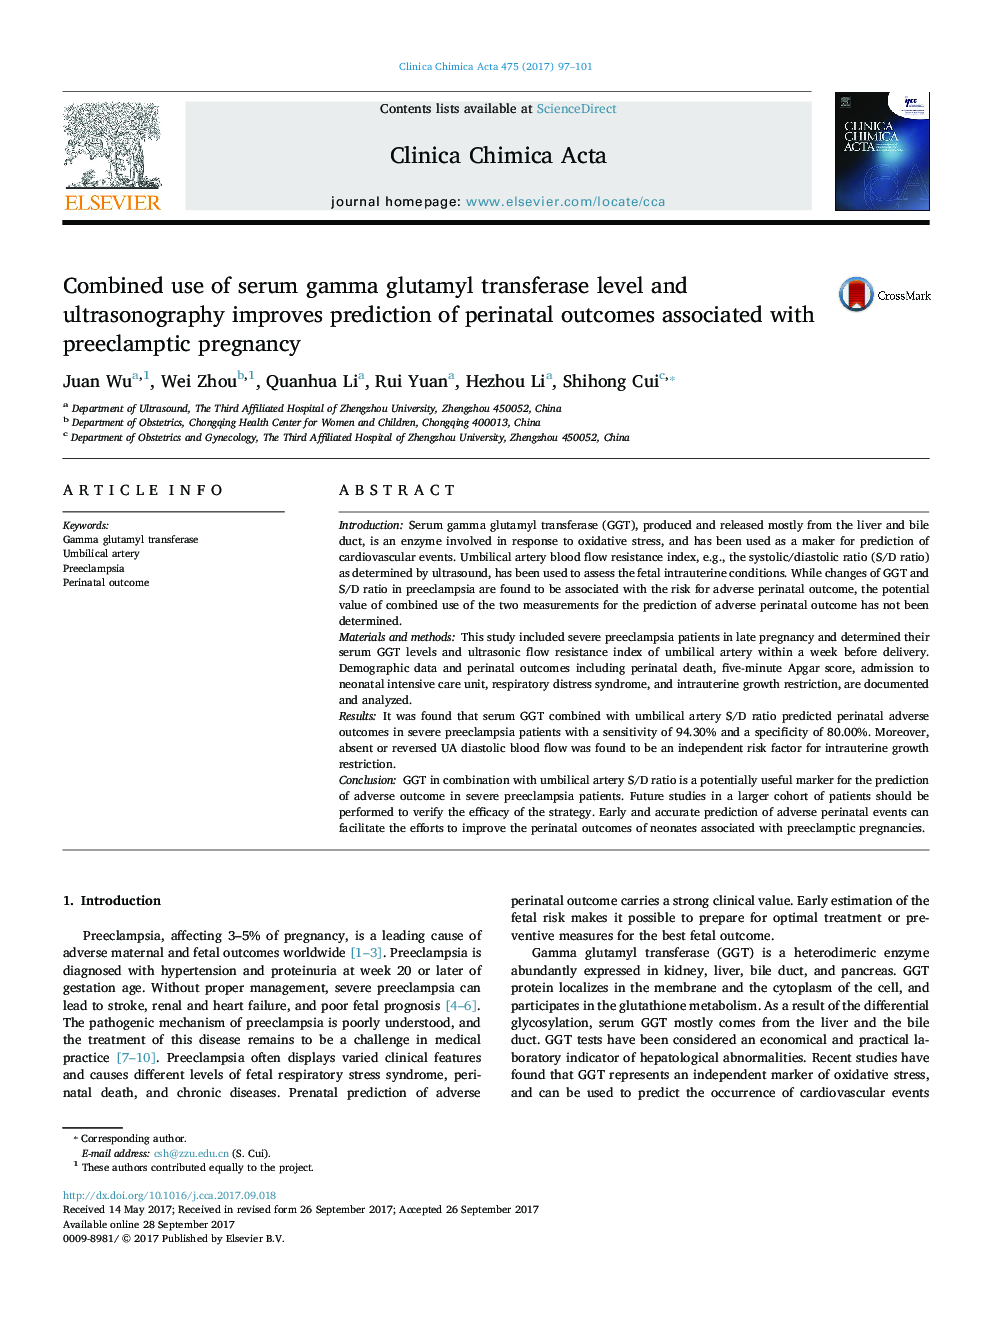 Combined use of serum gamma glutamyl transferase level and ultrasonography improves prediction of perinatal outcomes associated with preeclamptic pregnancy